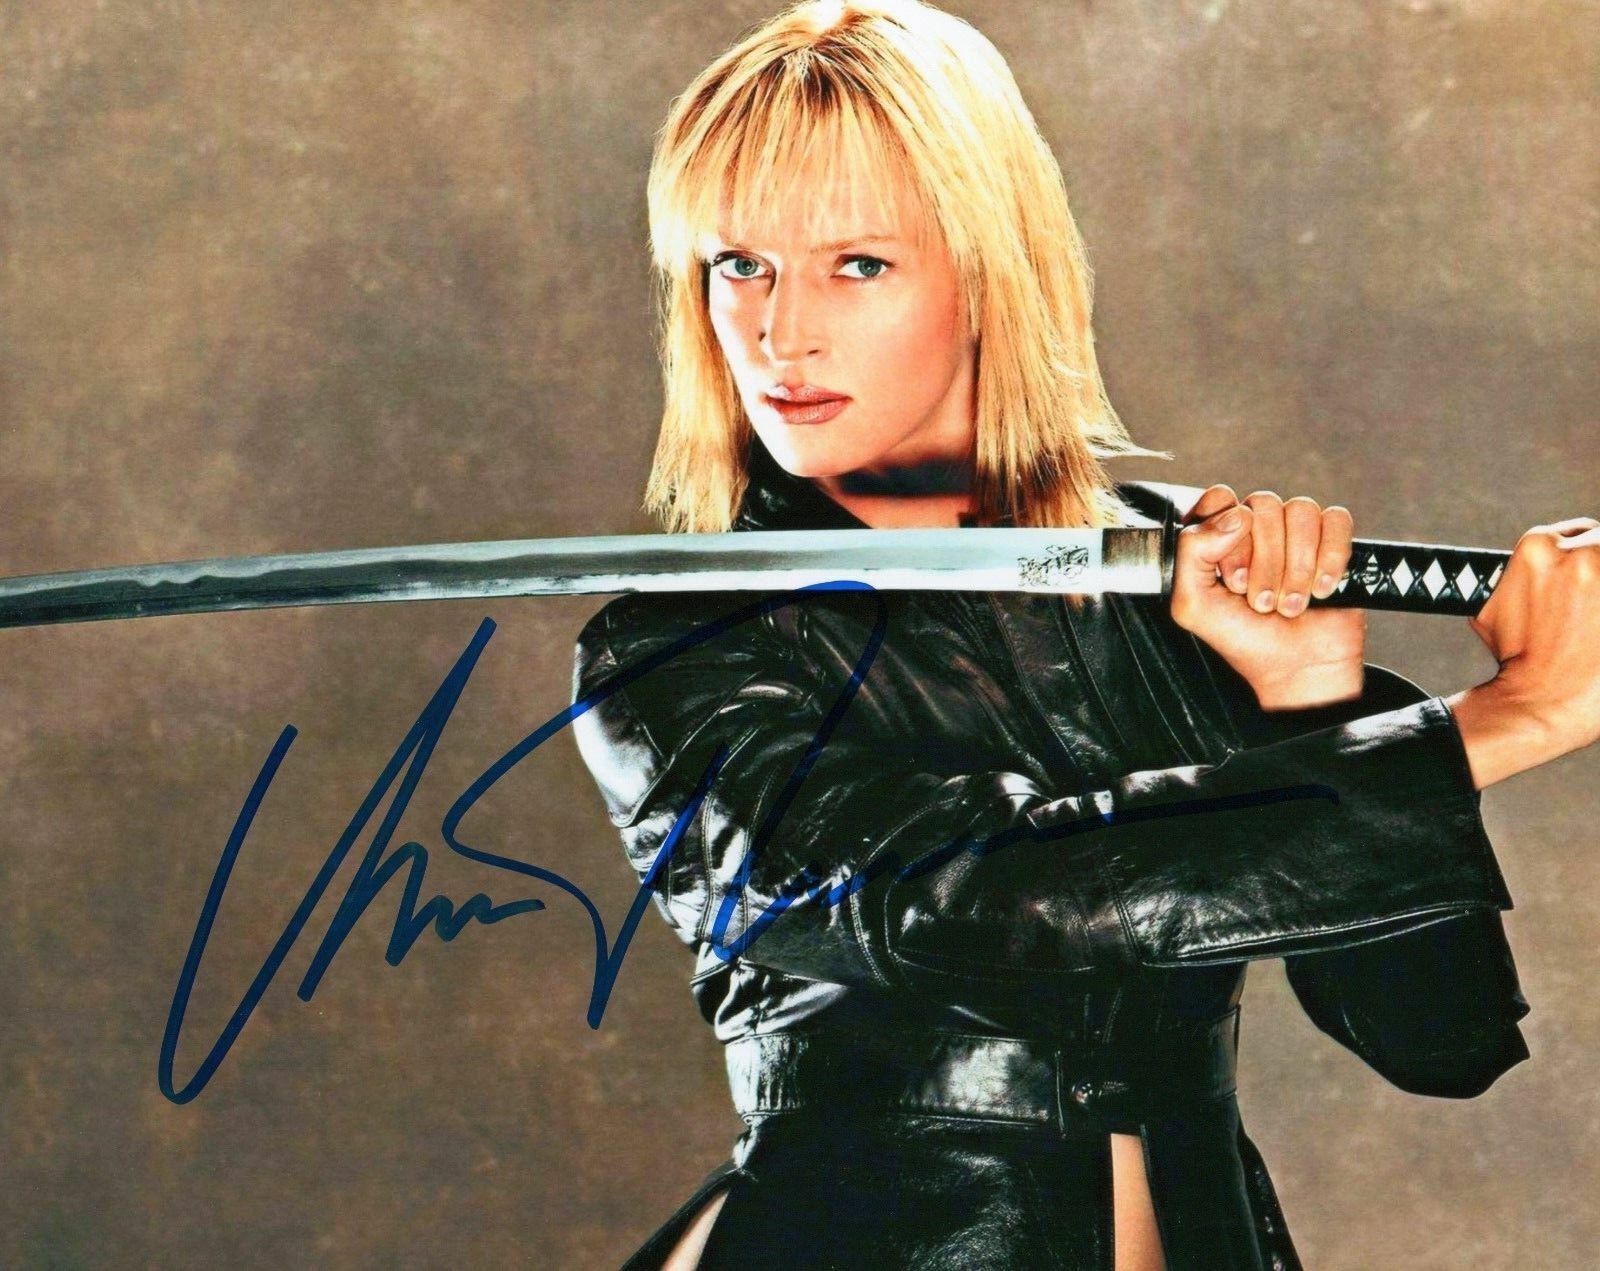 UMA THURMAN - KILL BILL AUTOGRAPHED SIGNED A4 PP POSTER Photo Poster painting PRINT 7